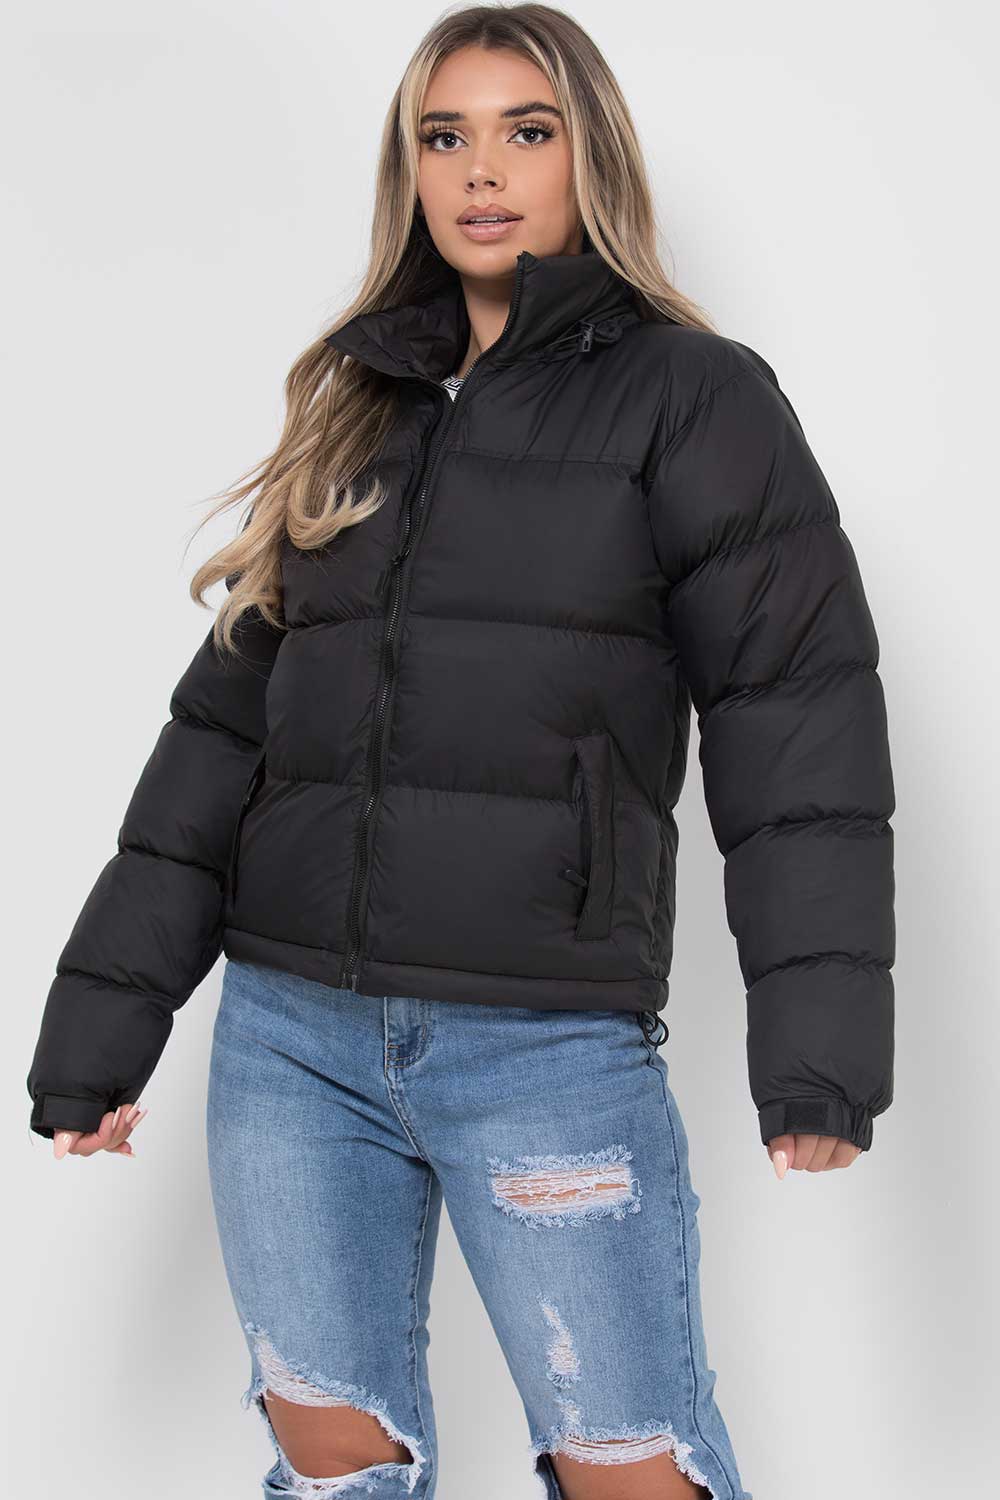 Women's Black Puffer Jacket North Face Inspired –